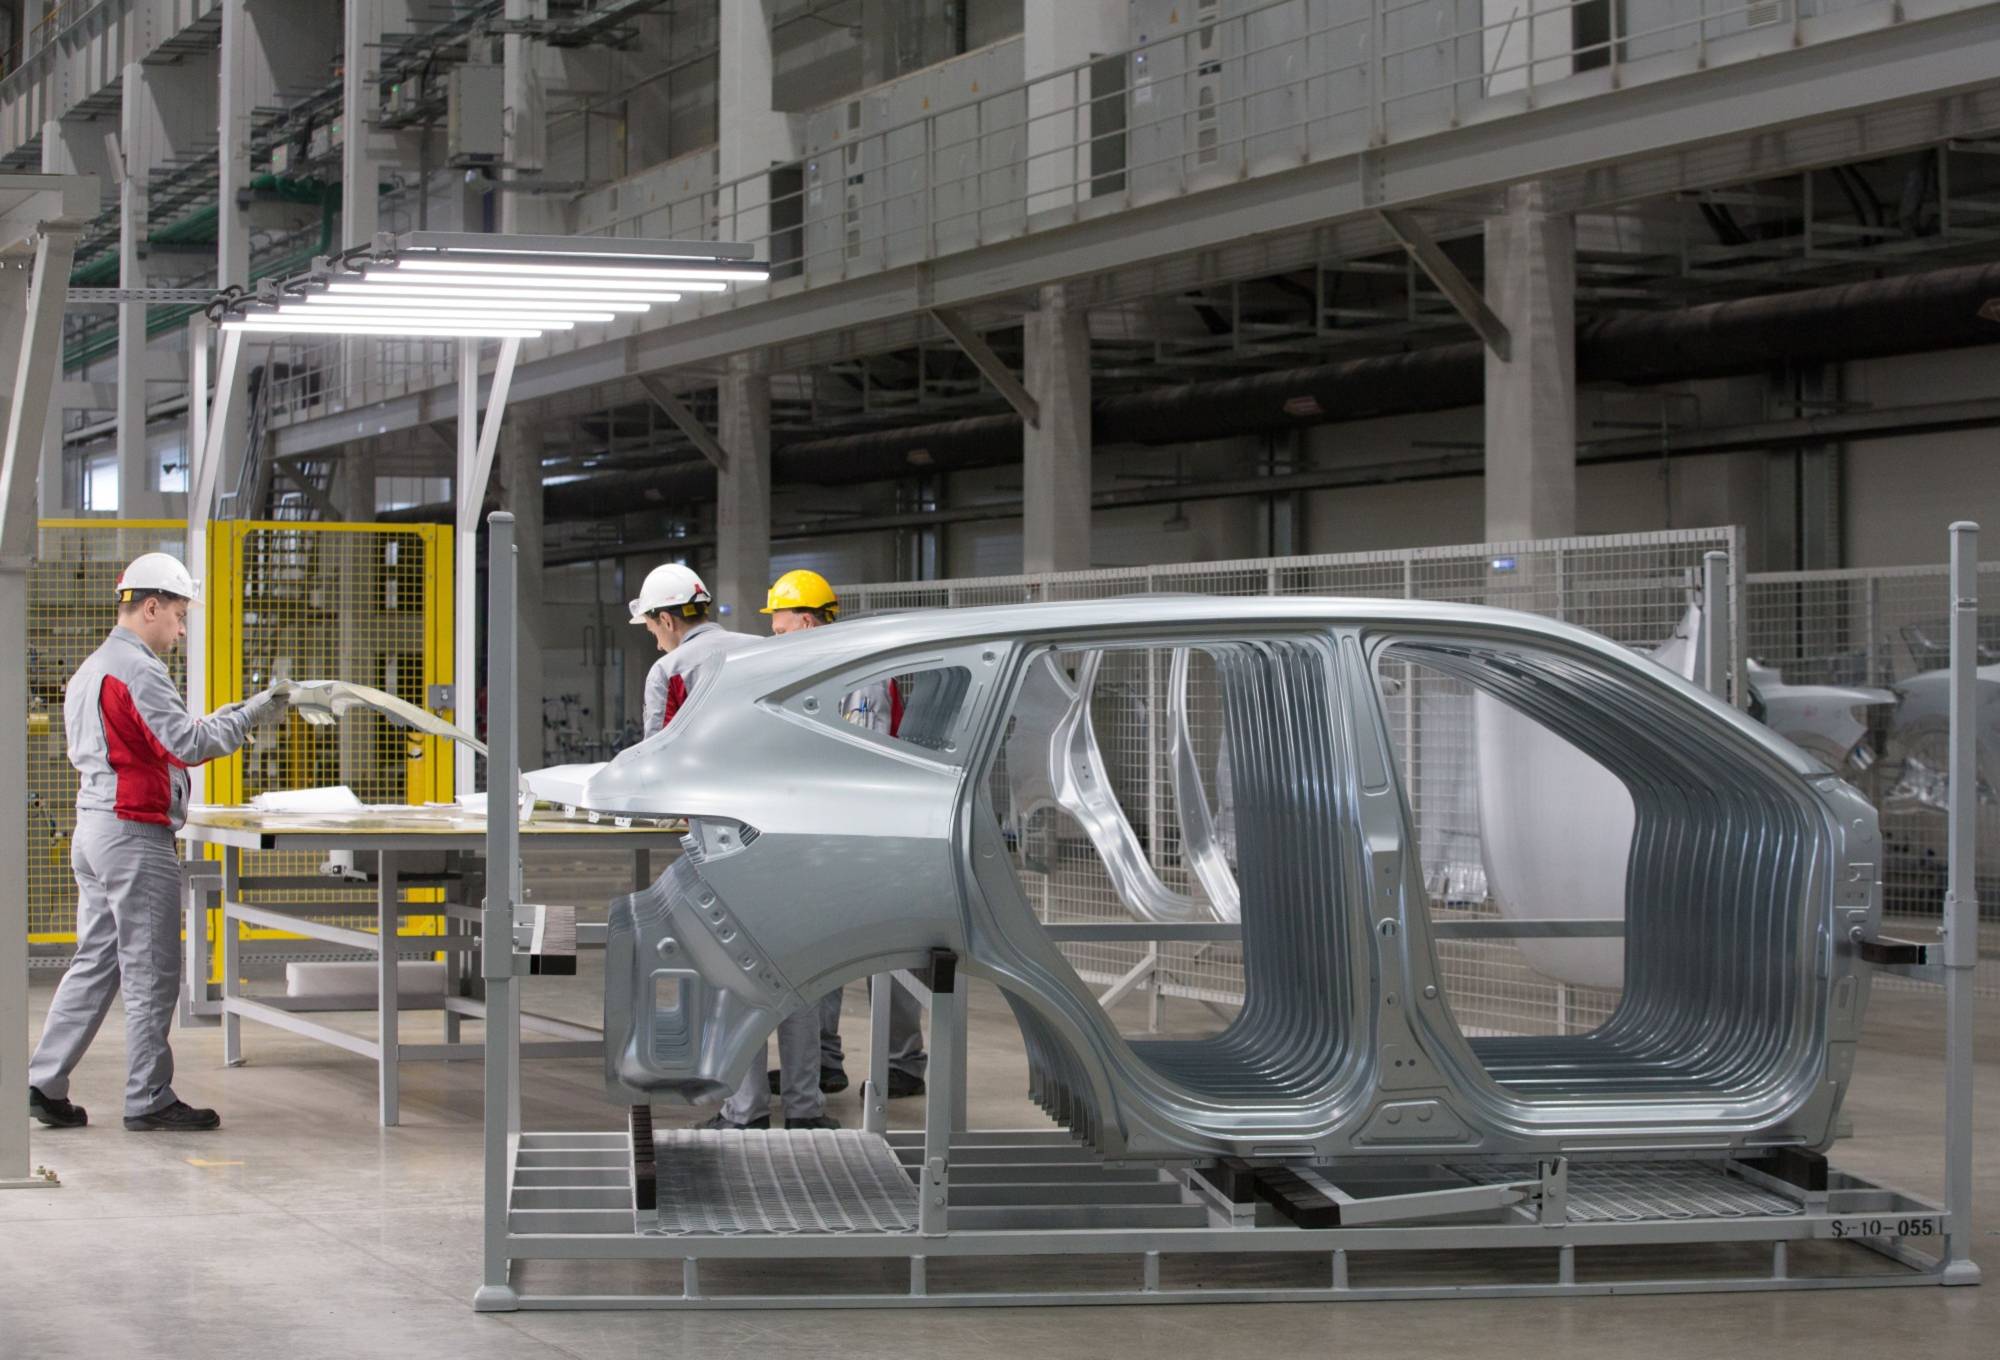 Workers on the assembly line inside the Haval automobile plant, operated by Great Wall Motor, at the Uzlovaya industrial park, near Tula, Russia, in August 2019. | BLOOMEBRG